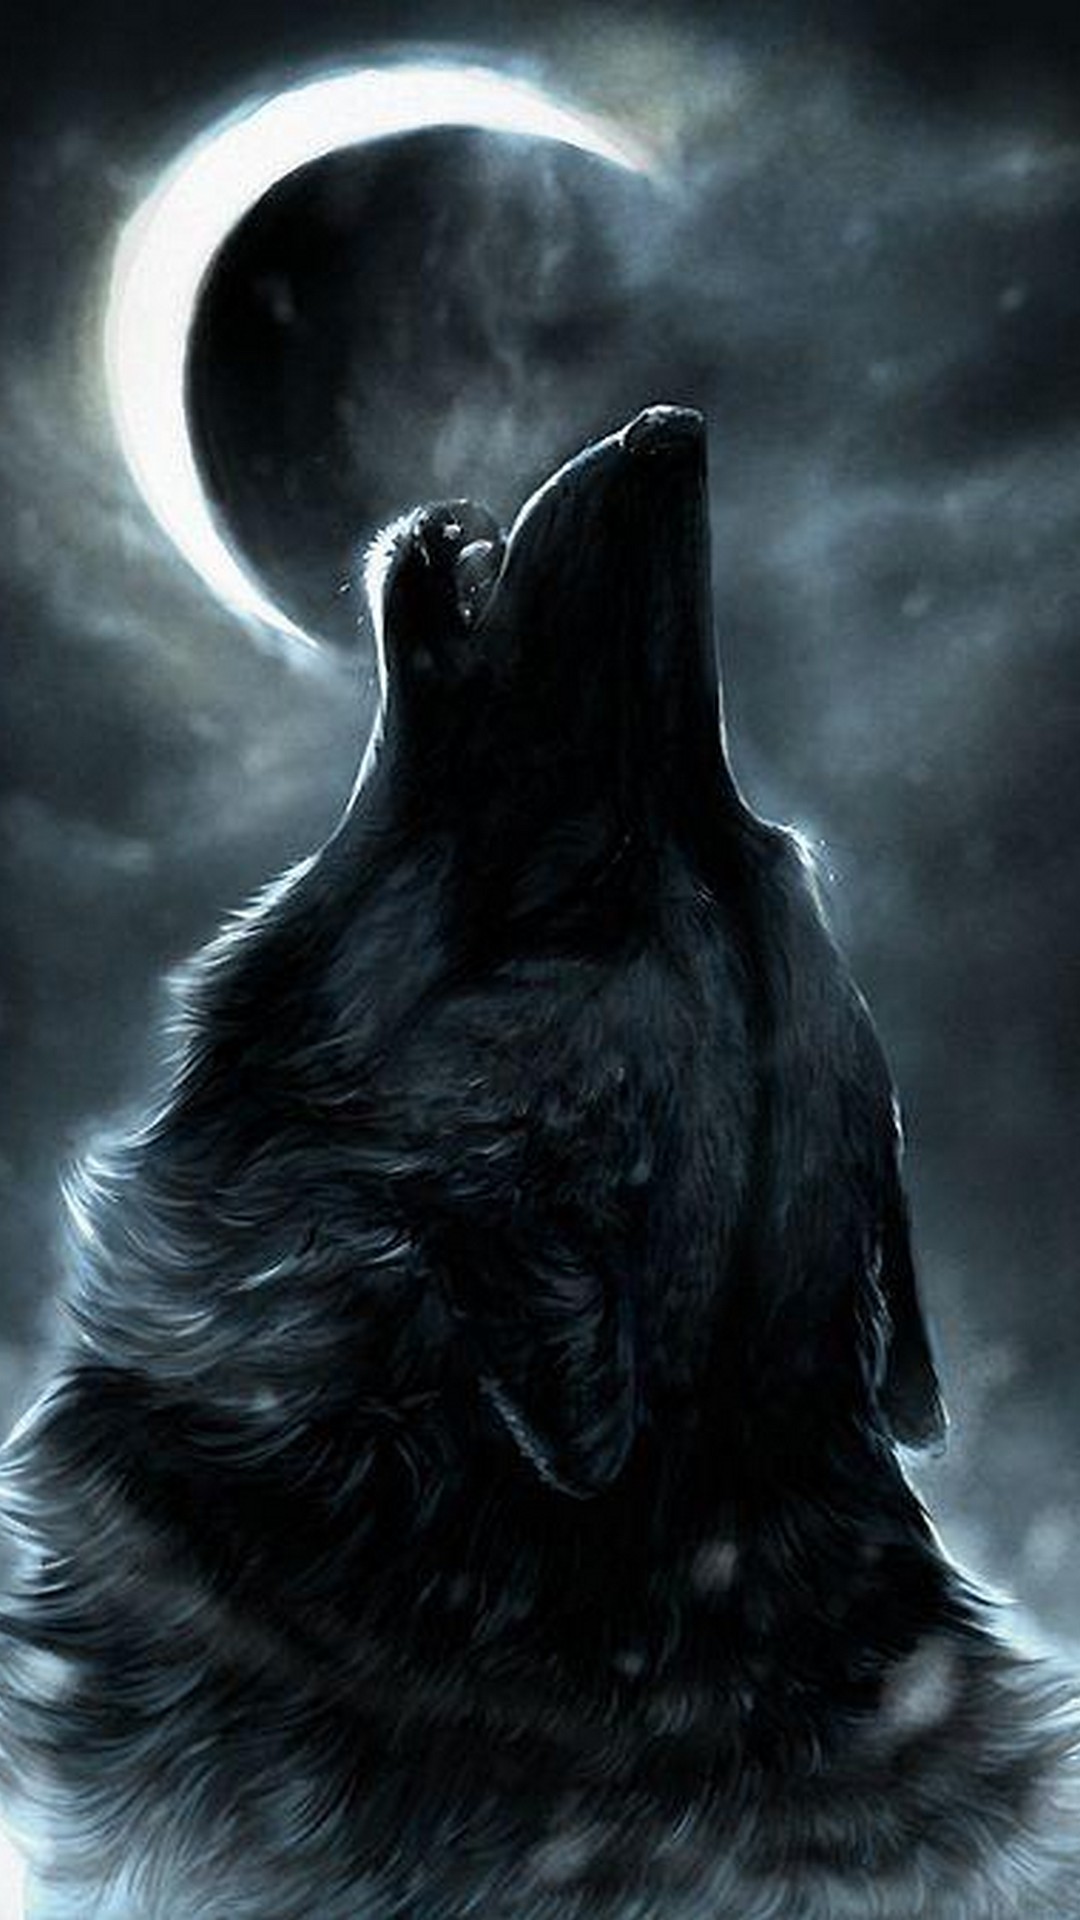 Cool Wolf Iphone X Wallpaper Hd With High Resolution Iphone Wolf Wallpaper Hd 3230869 Hd Wallpaper Backgrounds Download Find hd wallpapers for your desktop, mac, windows, apple, iphone or android device. cool wolf iphone x wallpaper hd with